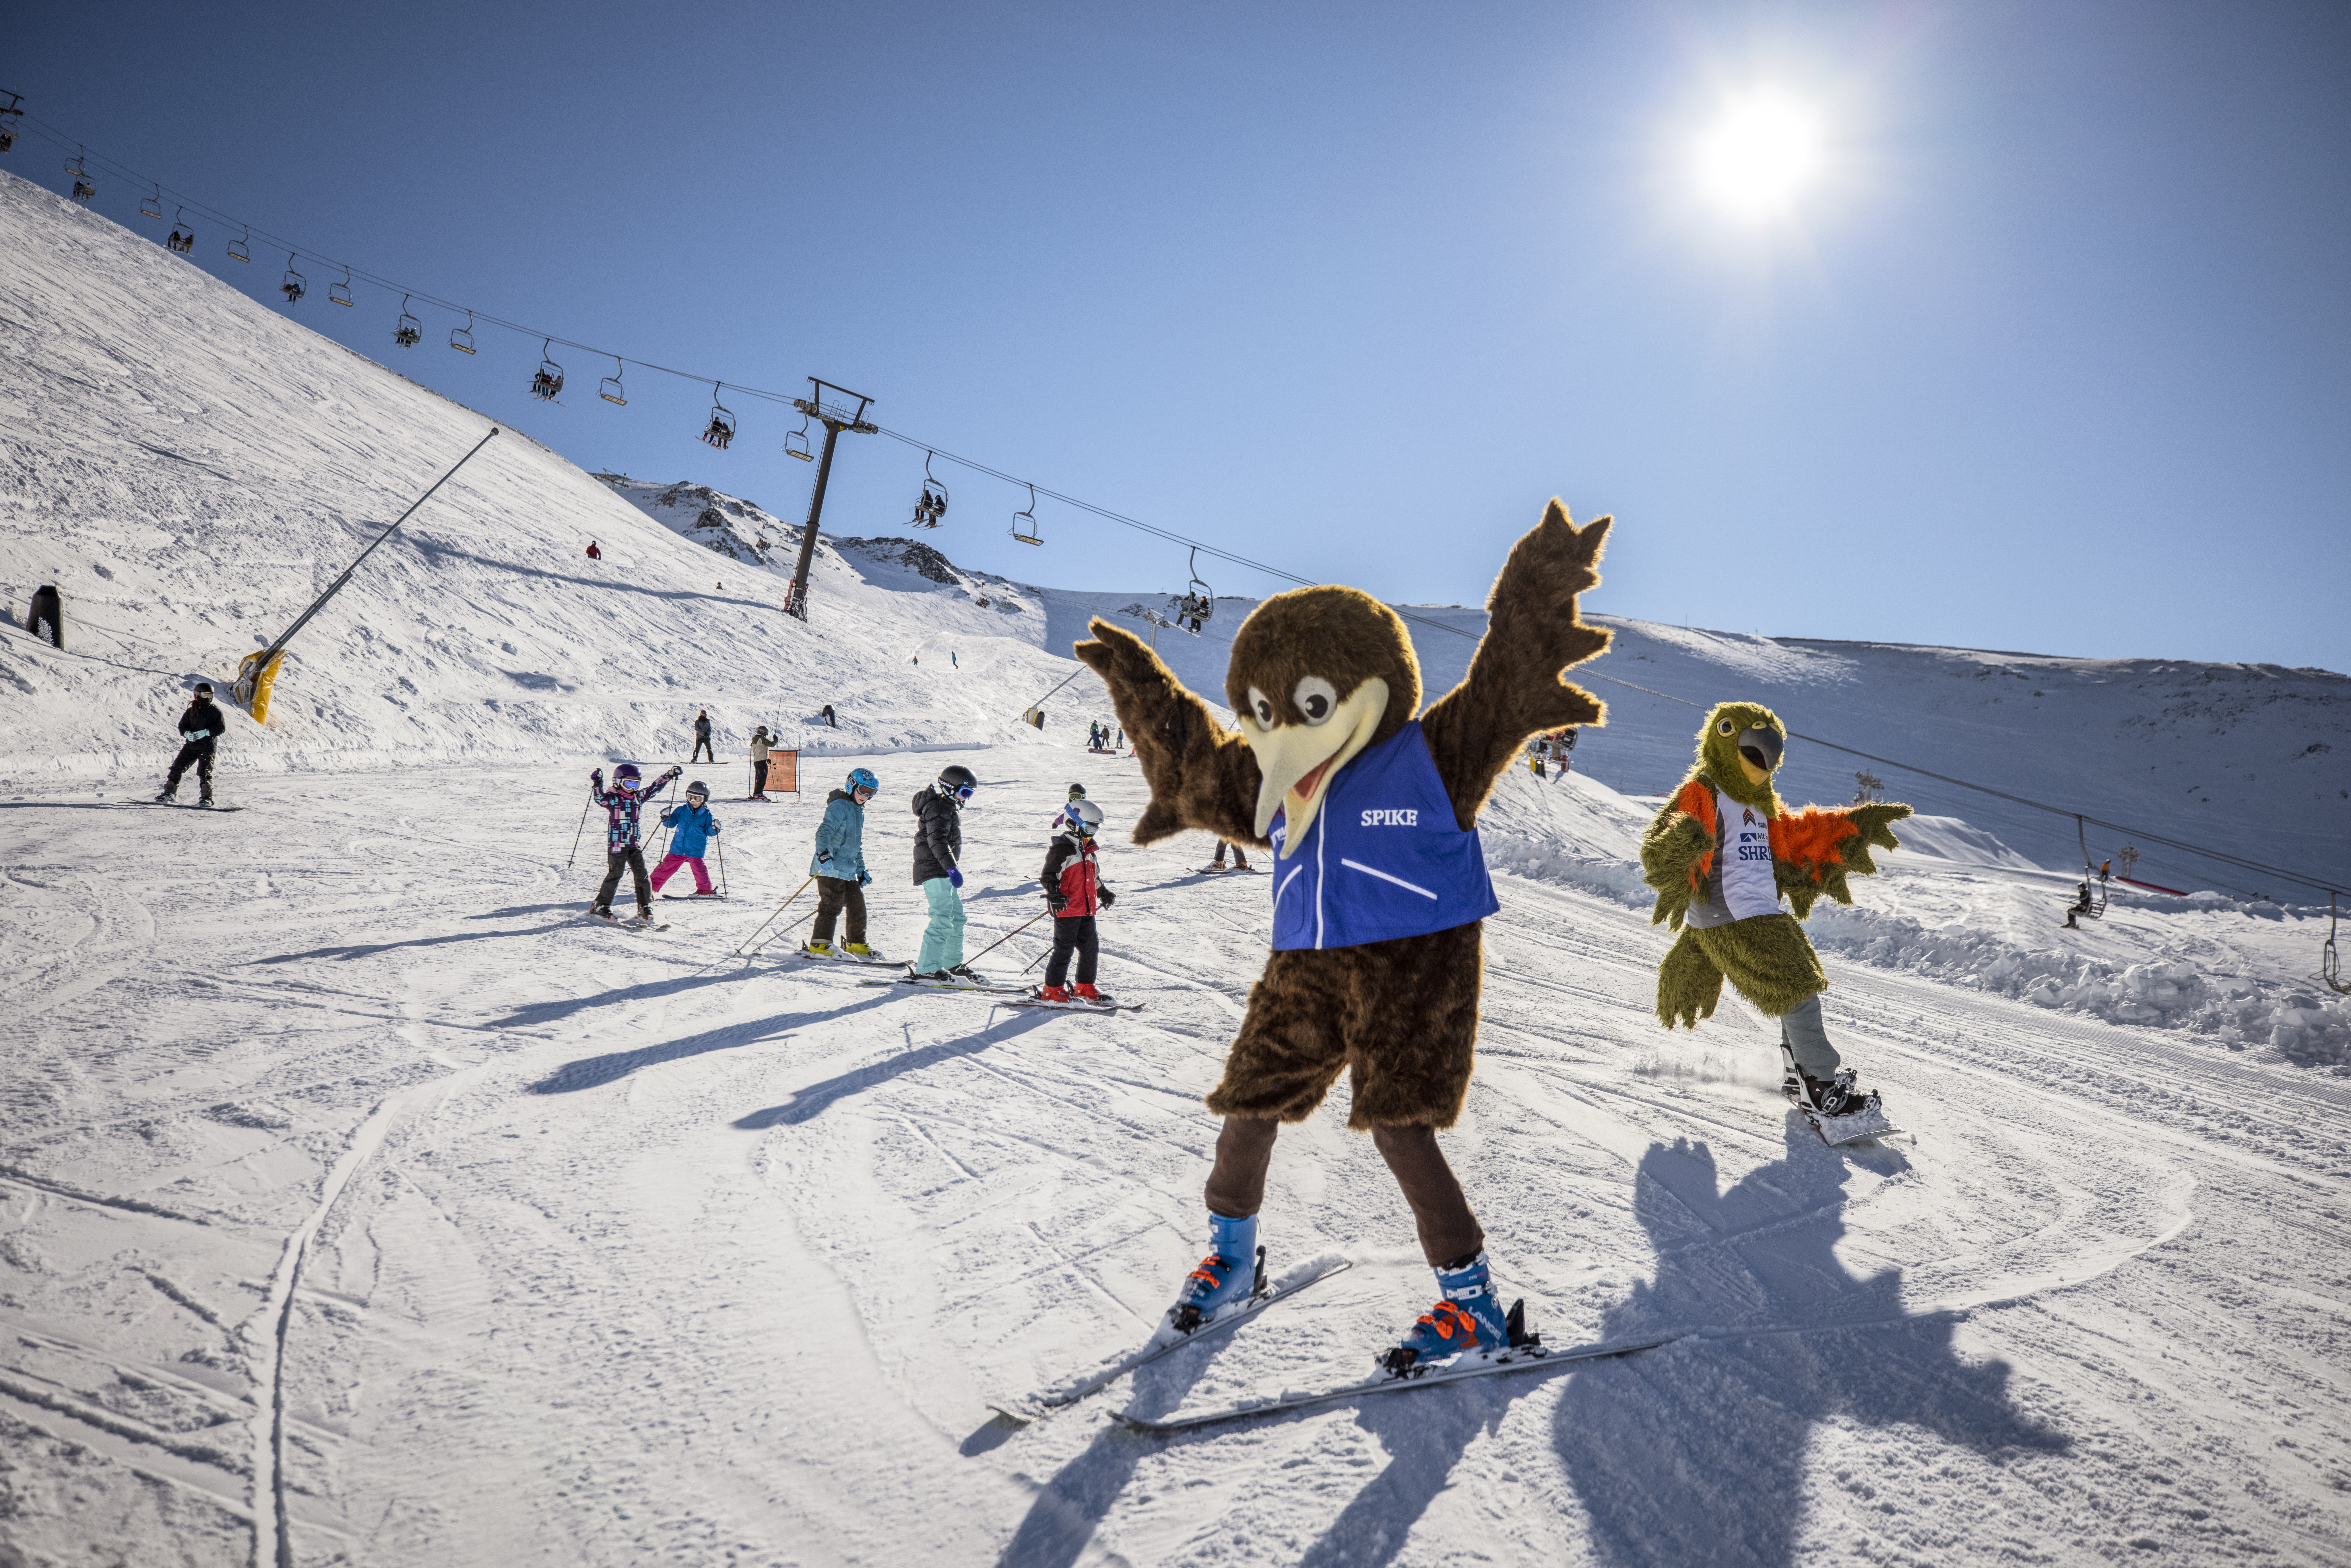 First time skiing? 10 tips you need to know before your New Zealand ski trip